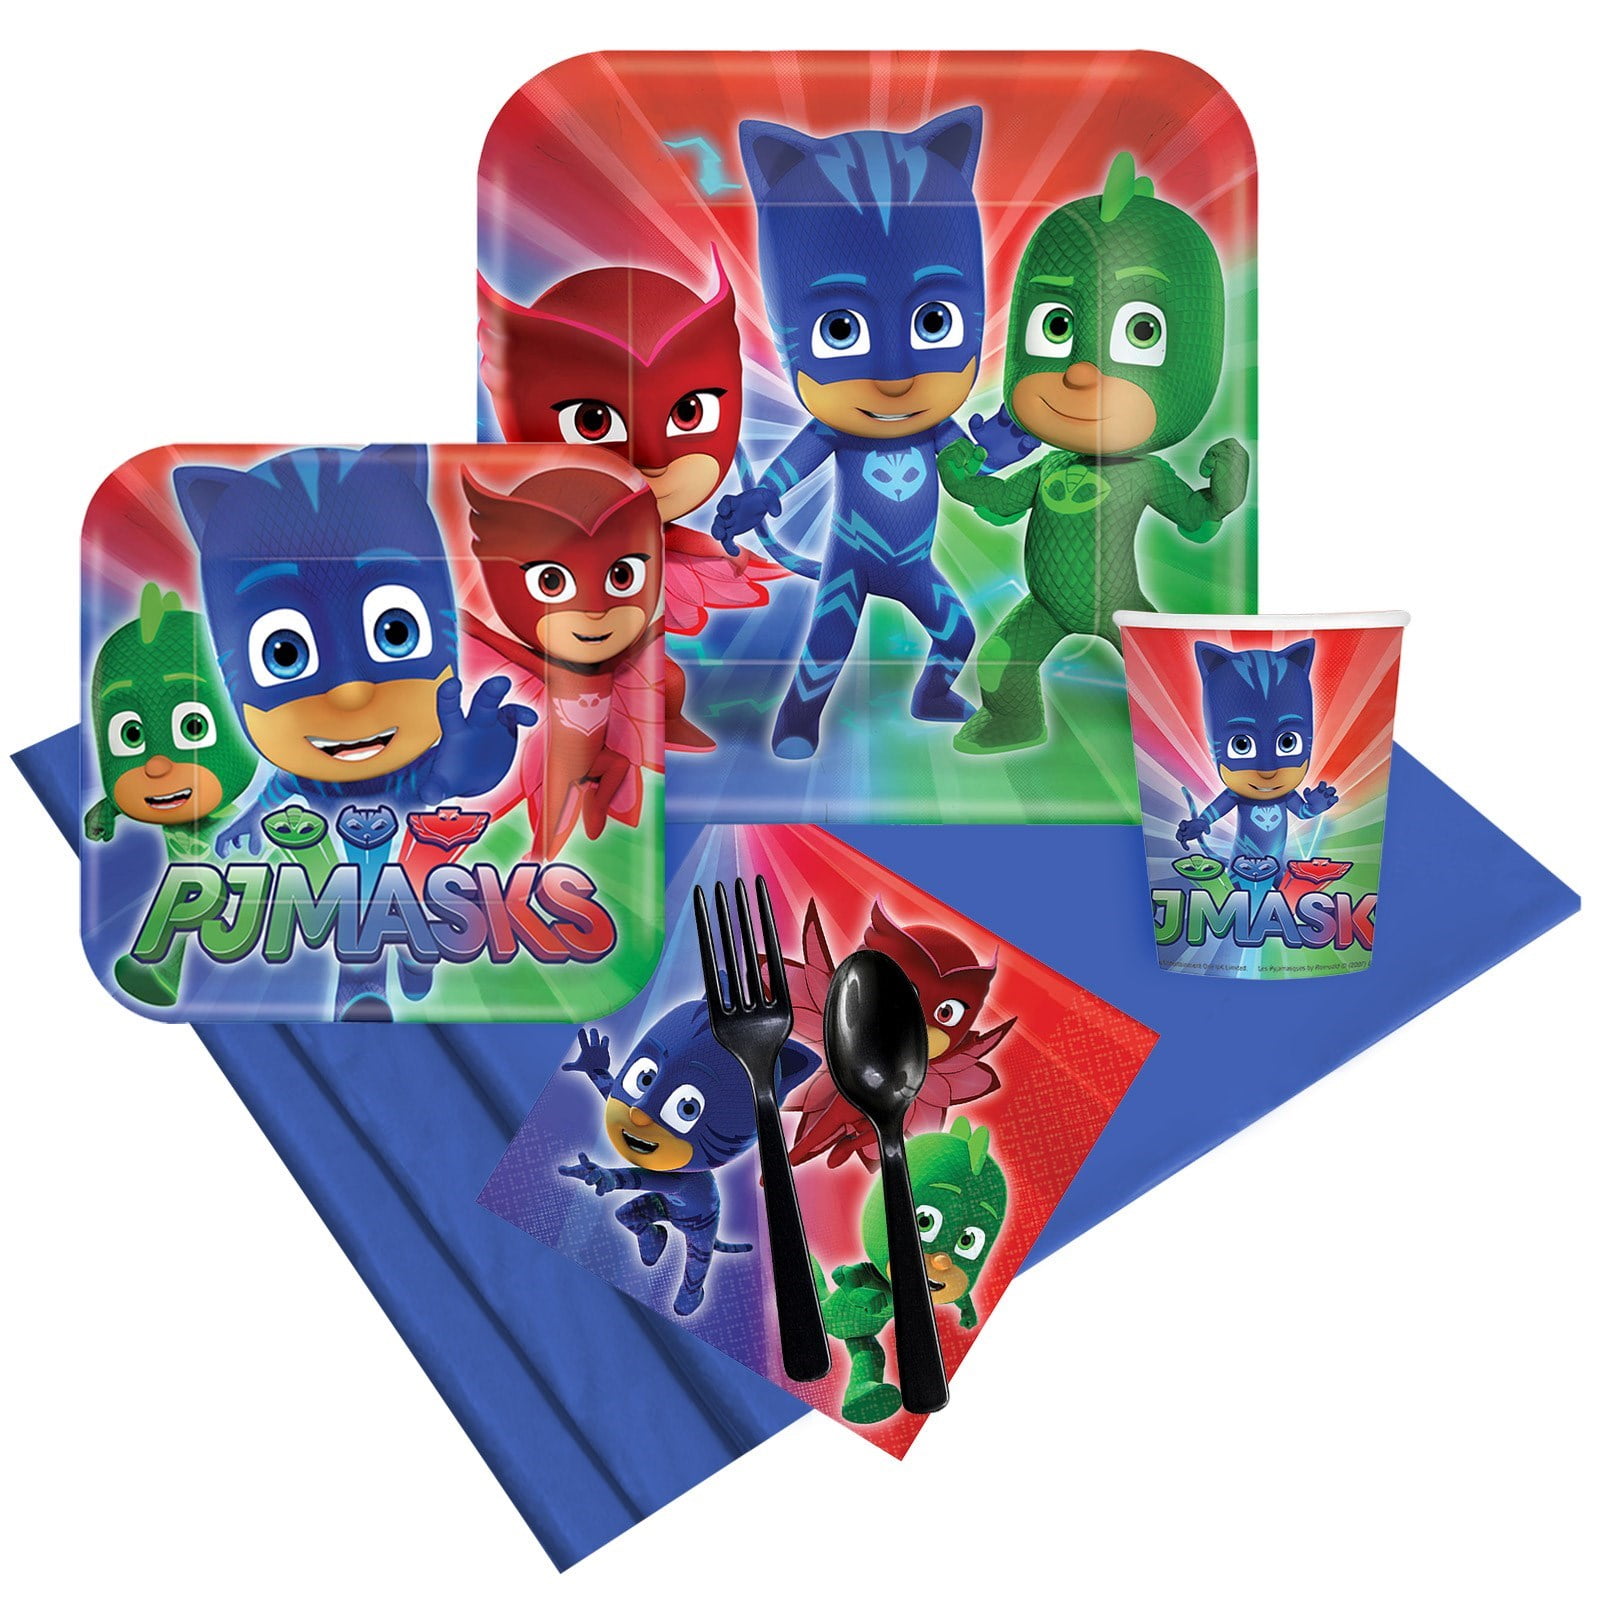 Serves 8 PJ Masks Party Plates Napkins and Cups Tableware Licensed PJ Masks Party Supplies Bundle for Birthday or Any Party 